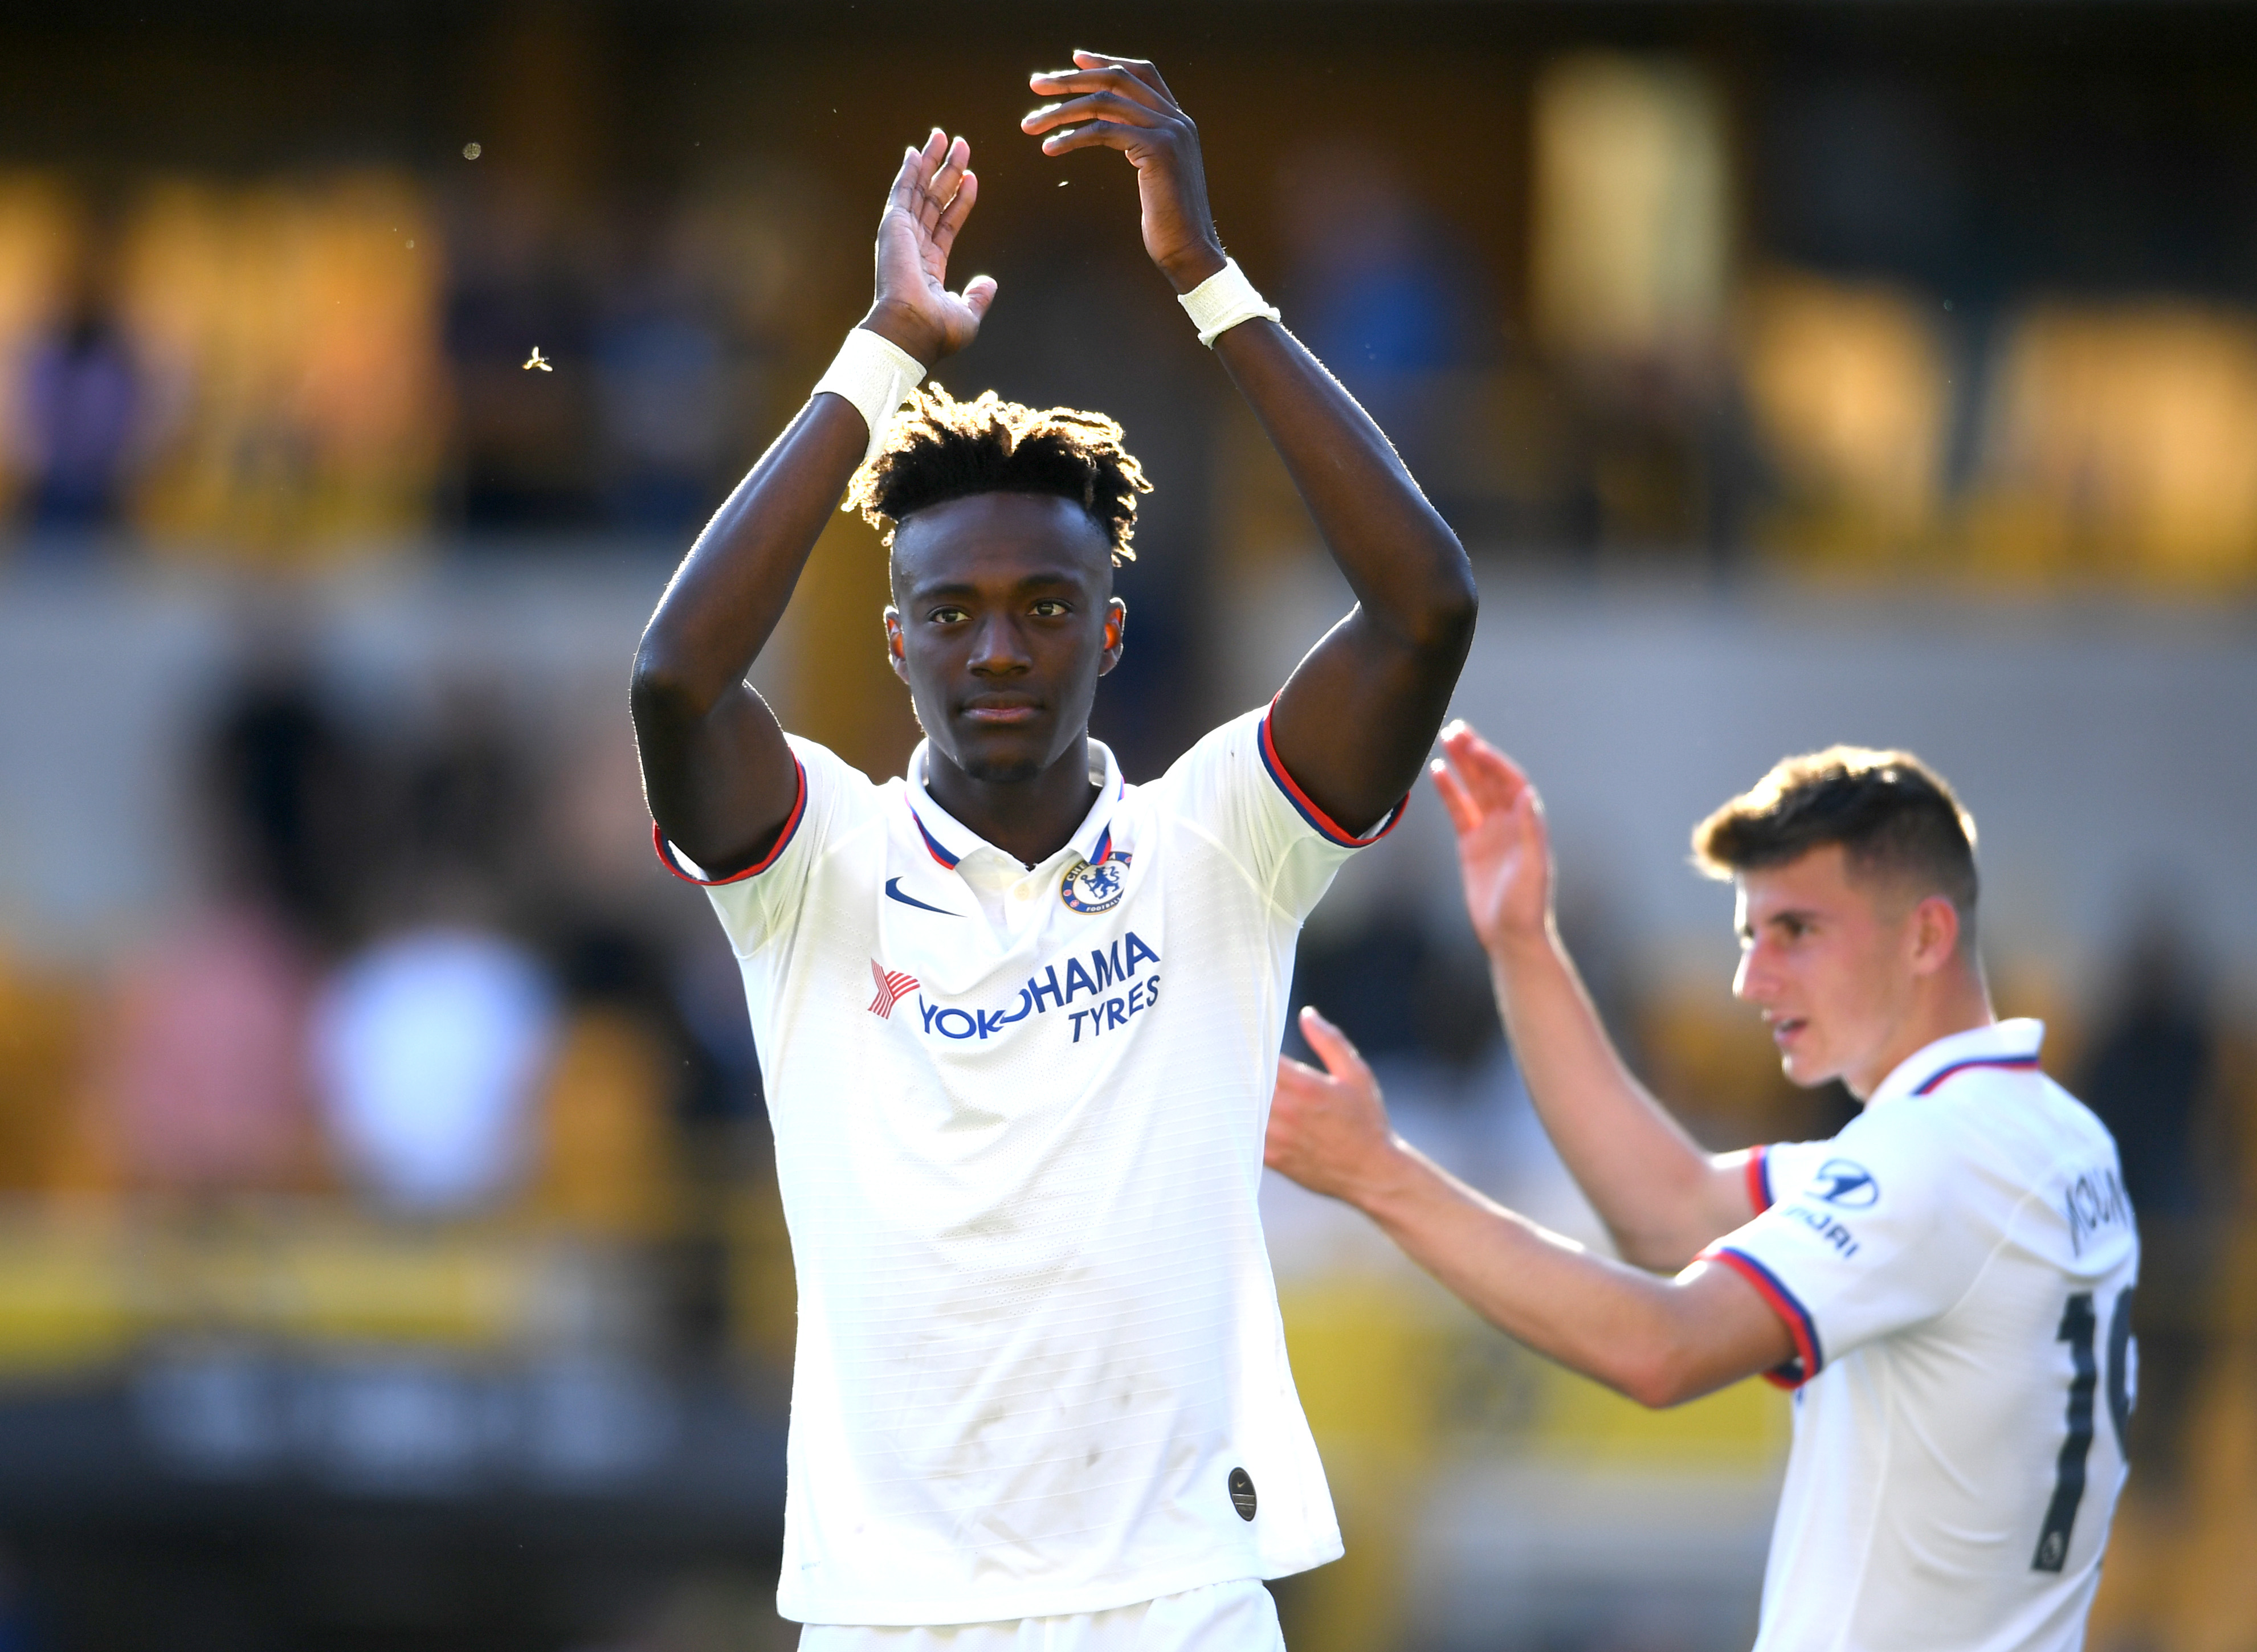 WOLVERHAMPTON, ENGLAND - SEPTEMBER 14: Tammy Abraham of Chelsea applauds fans following the Premier League match between Wolverhampton Wanderers and Chelsea FC at Molineux on September 14, 2019 in Wolverhampton, United Kingdom. (Photo by Clive Mason/Getty Images)